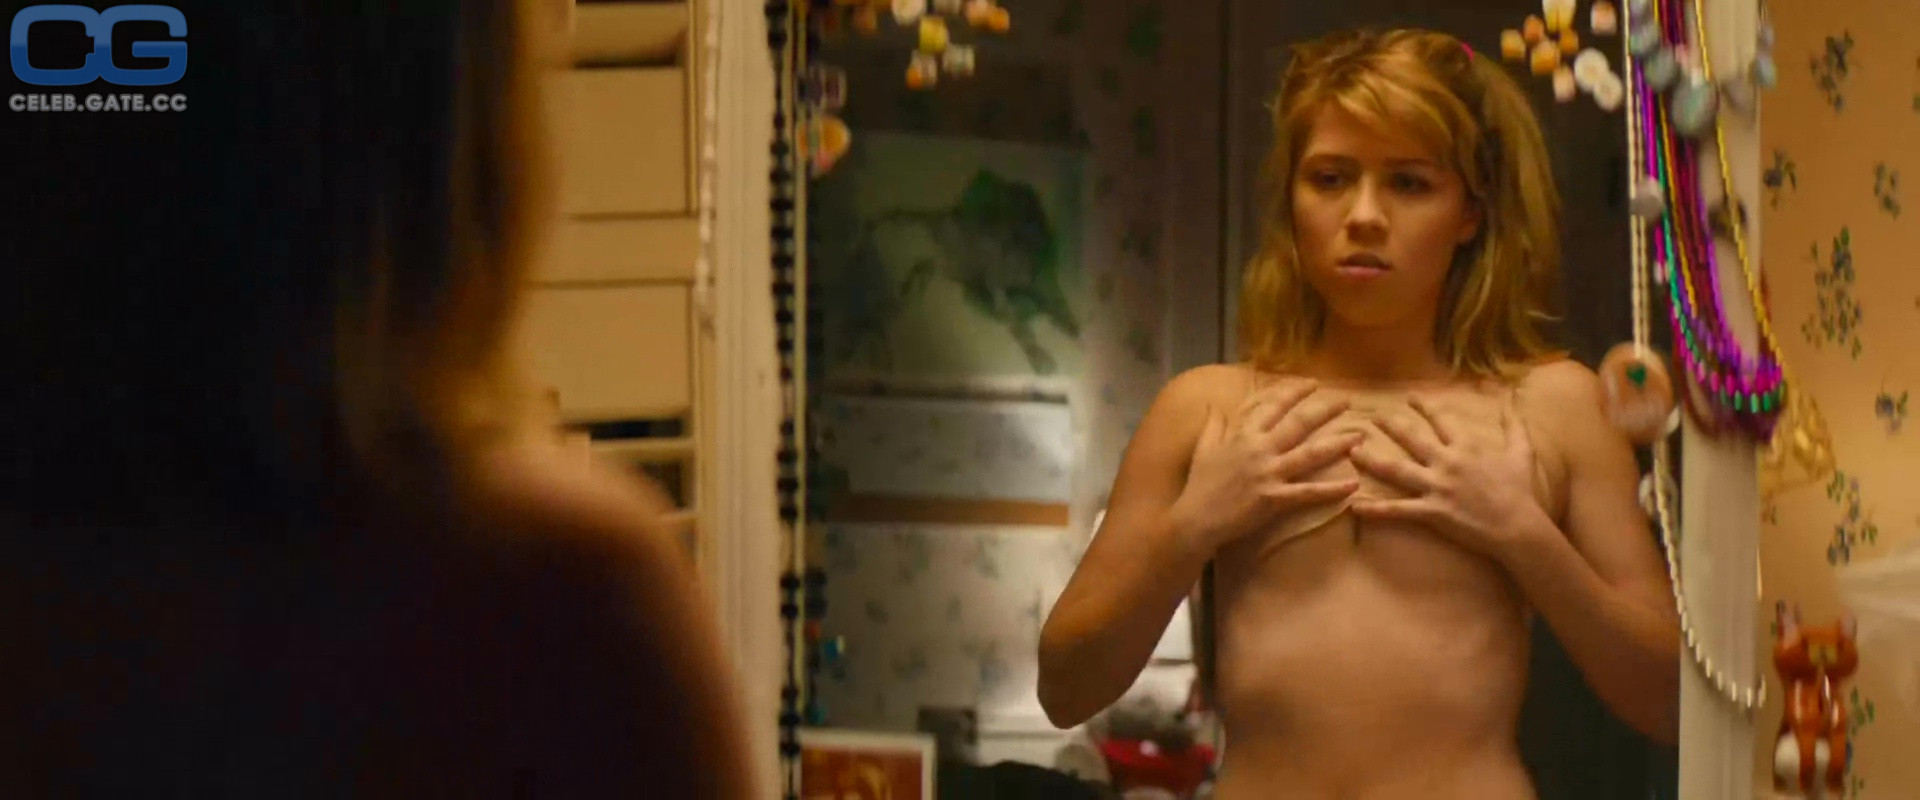 Mccurdy naked jennette Youth series